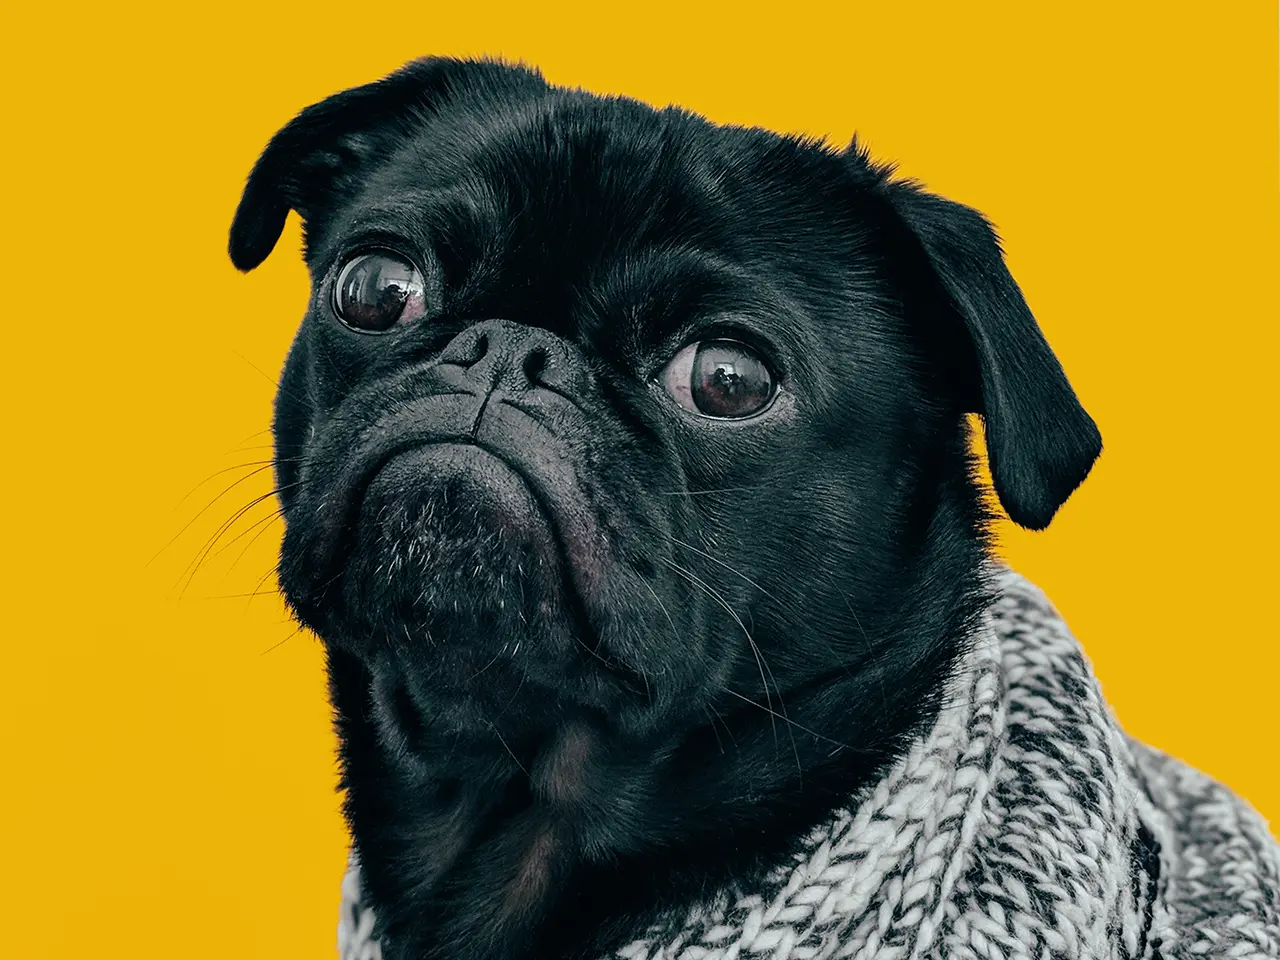 Black pug with gray knit scarf